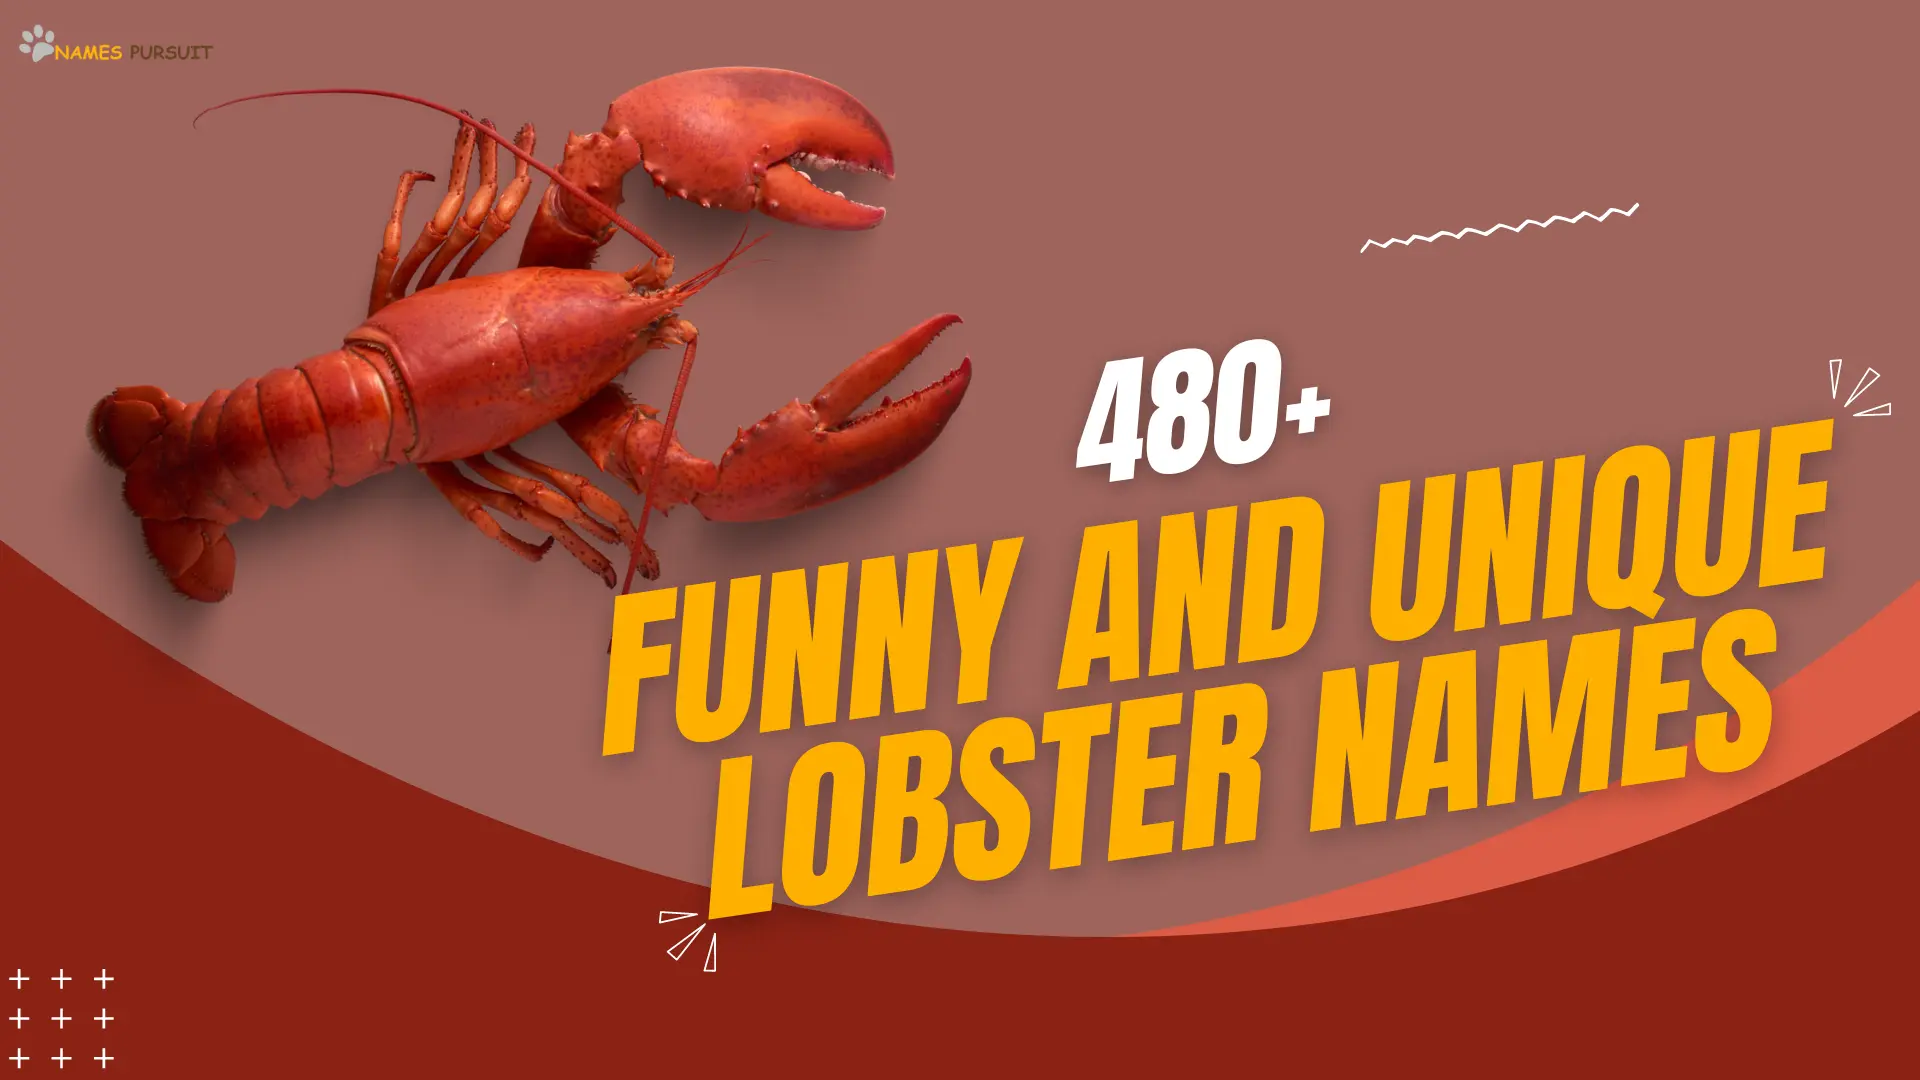 Funny and Unique Lobster Names